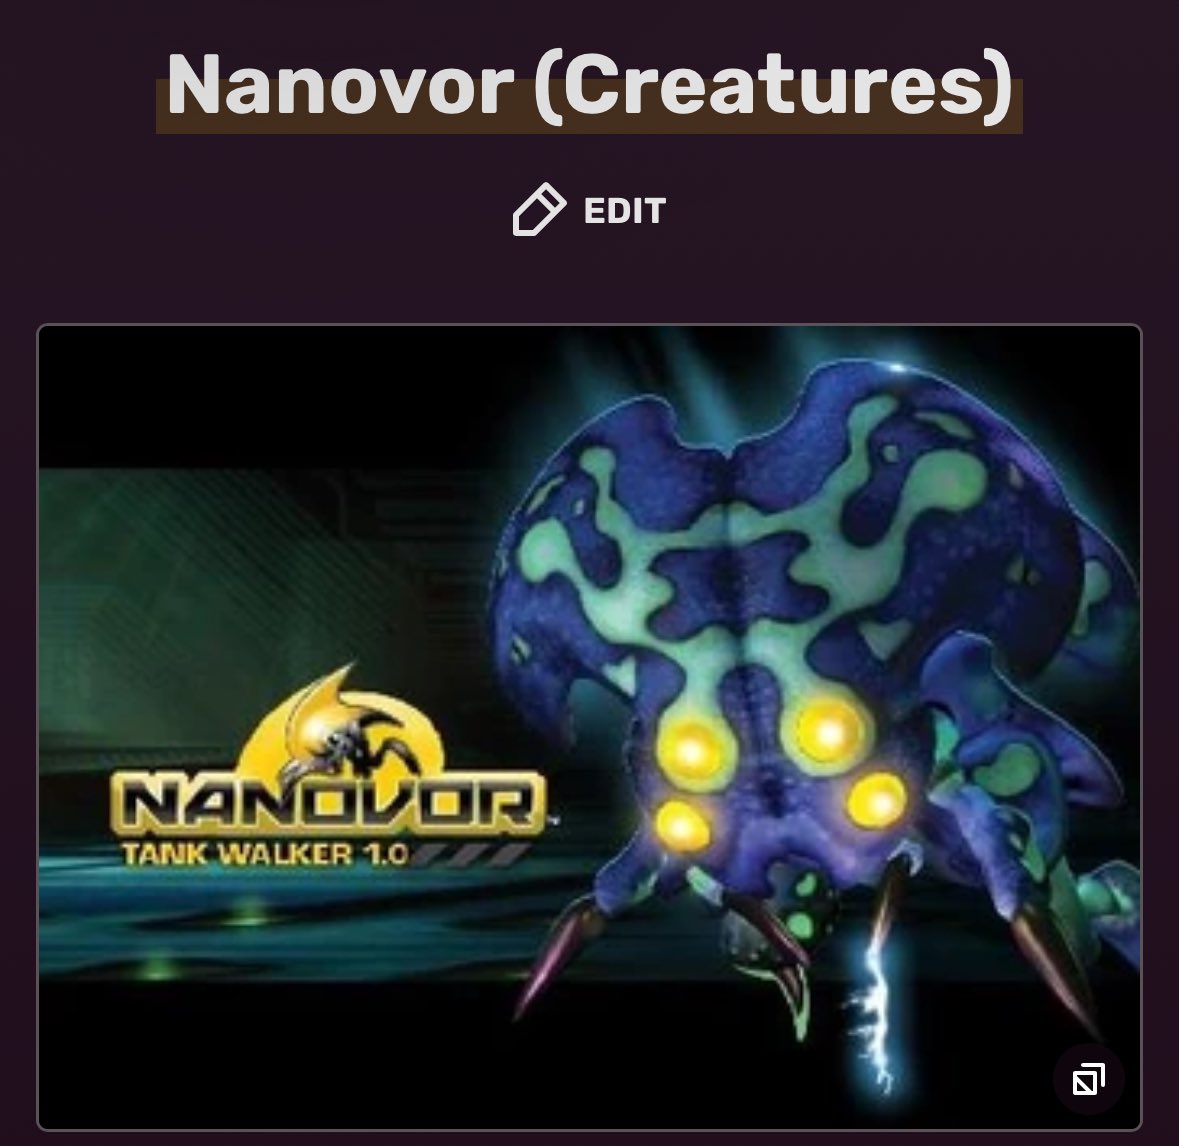 The moment in time when you rediscover a memory keeping you up at night. Aside Wizard101, Nanovor was my obsession in elementary. Lol. My early 2000s siblings you present?
#Nanovor
#BlastFromthePast
#Nostalgic
👇👇👇👇👇👇